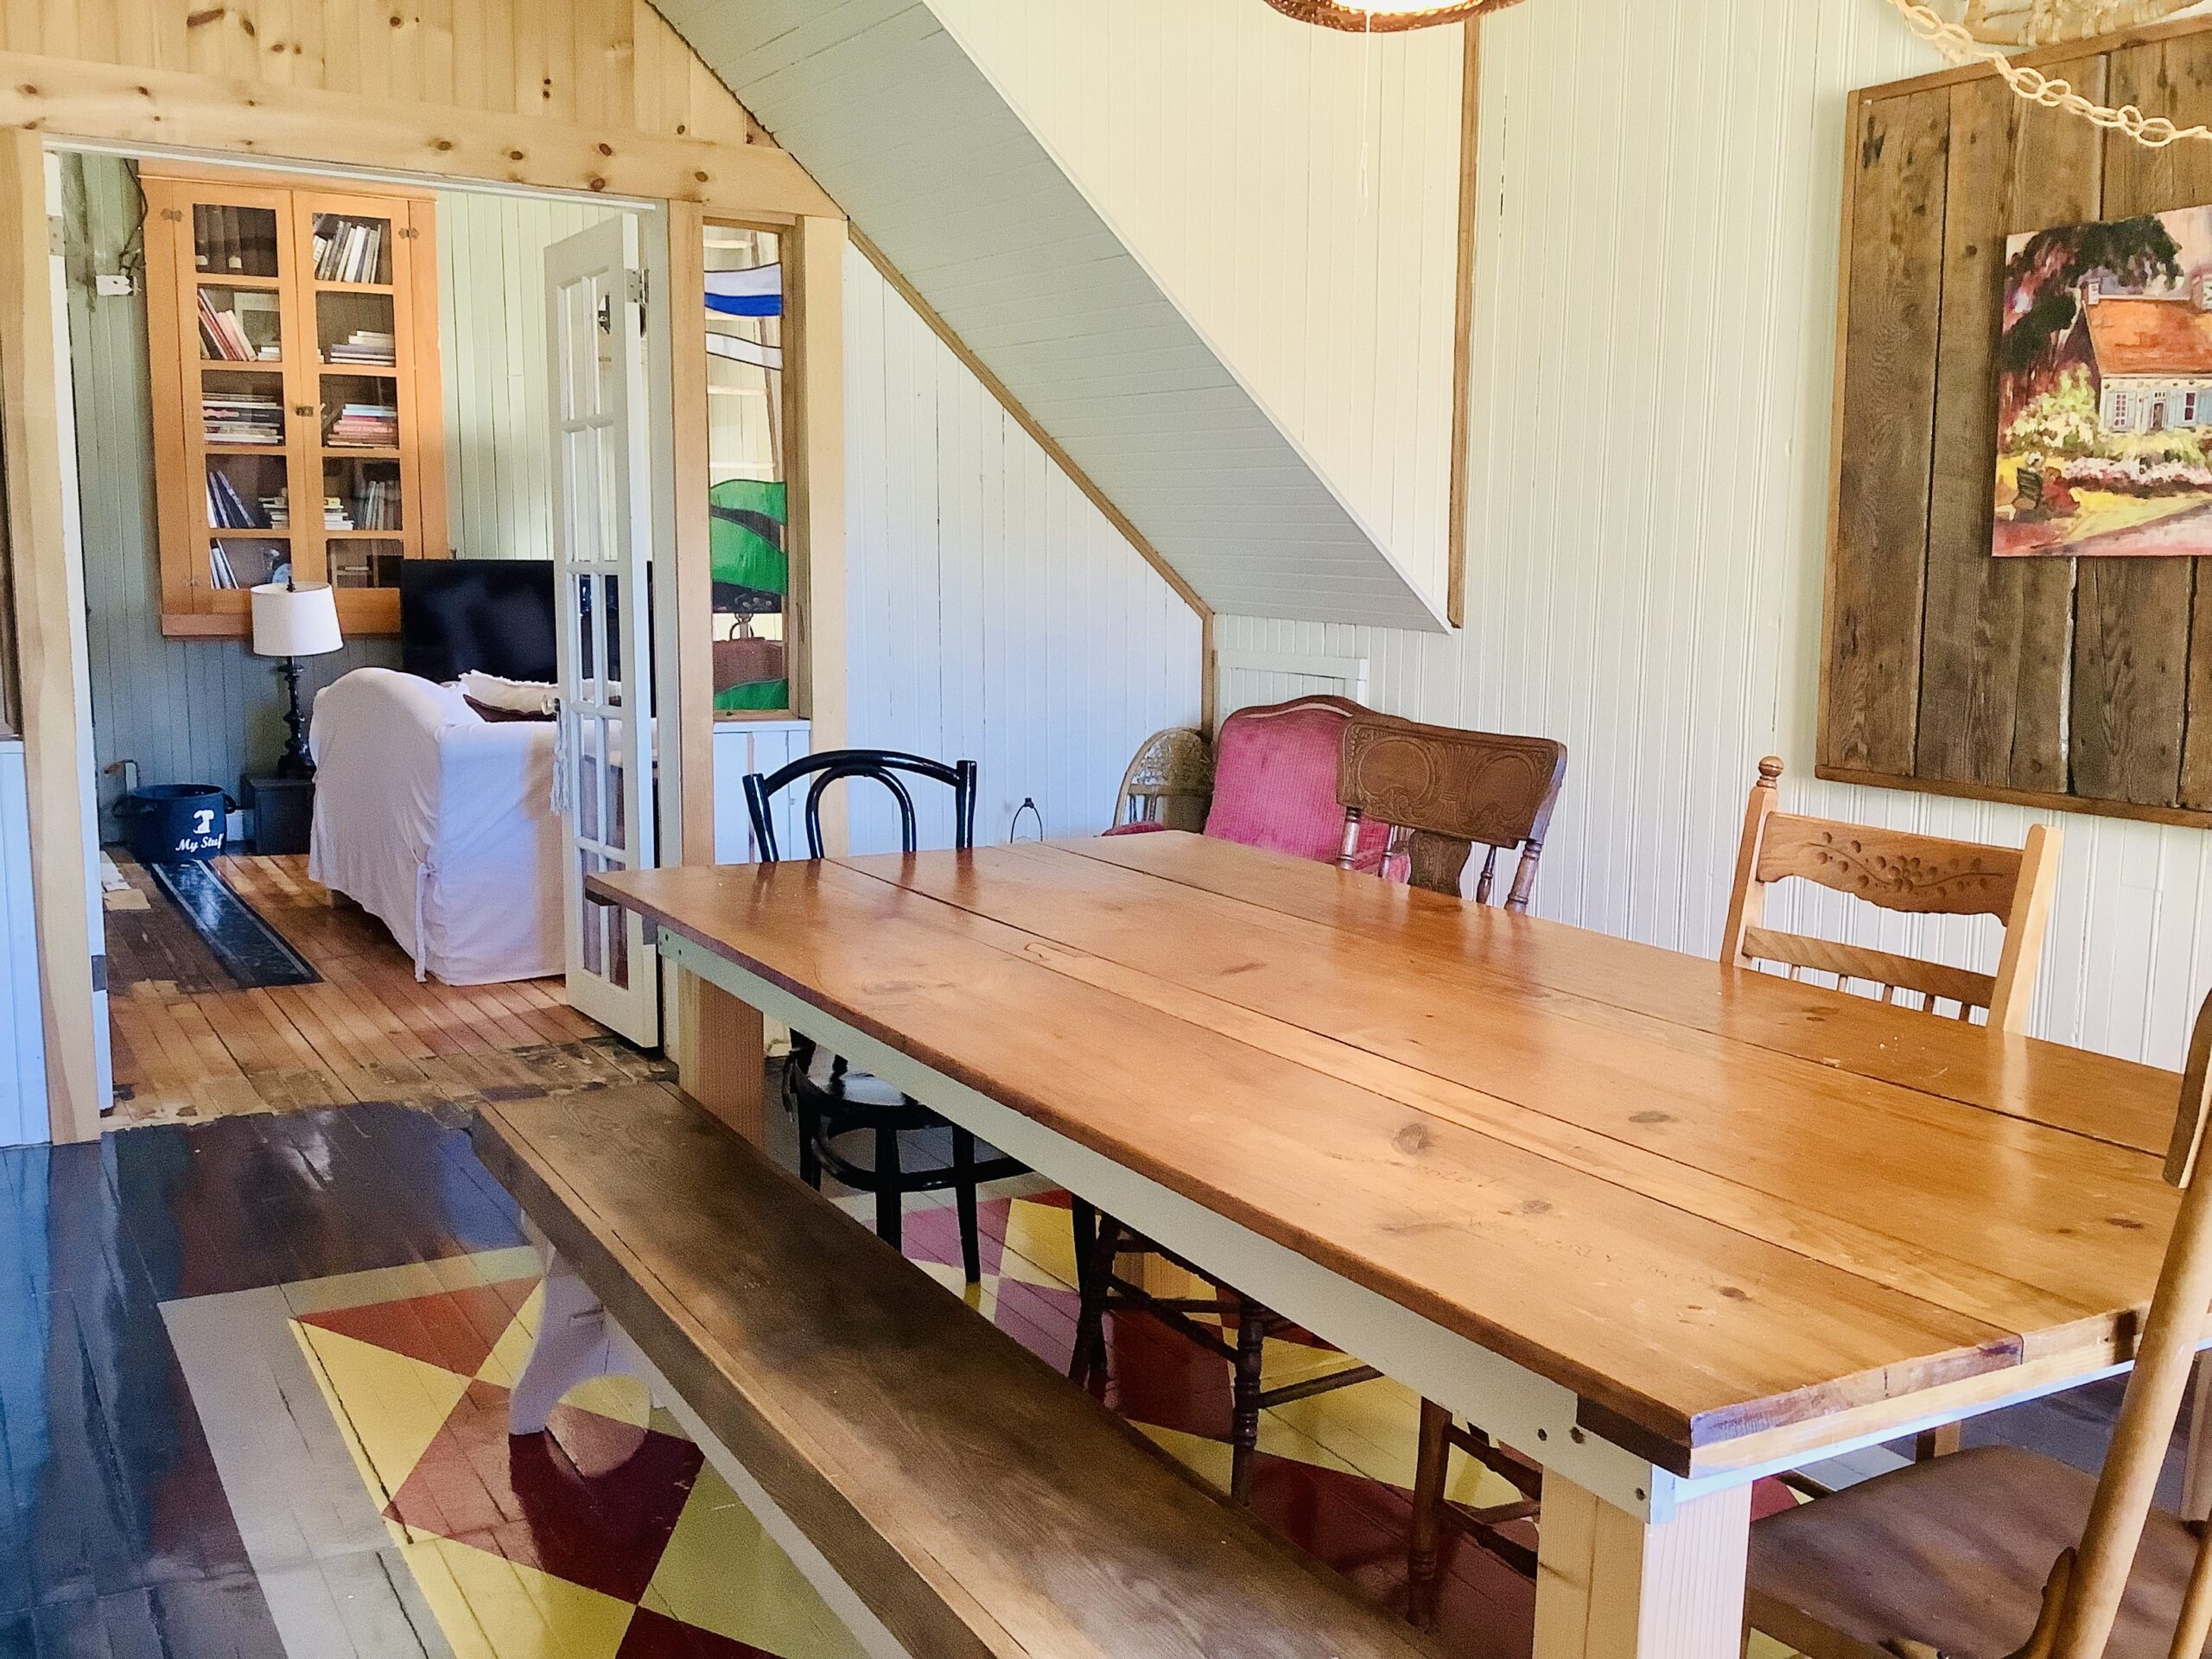 A dining area with a farmhouse-style table that has a bench on one side and mismatched wooden chairs around the other side. The walls are white-painted wood.